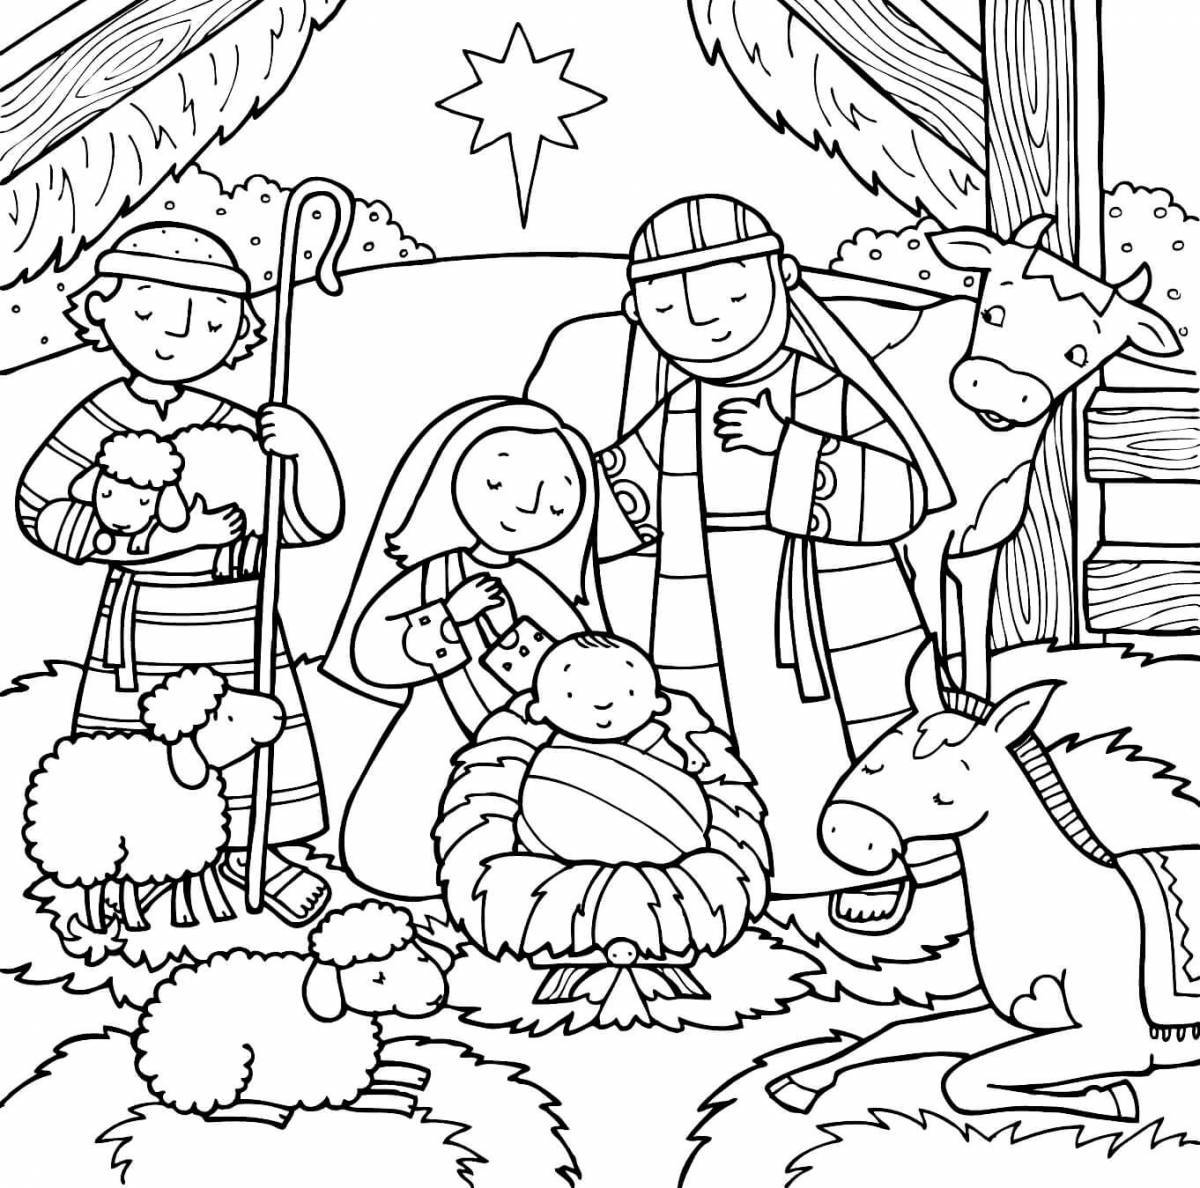 Festive Christmas coloring book for 6-7 year olds